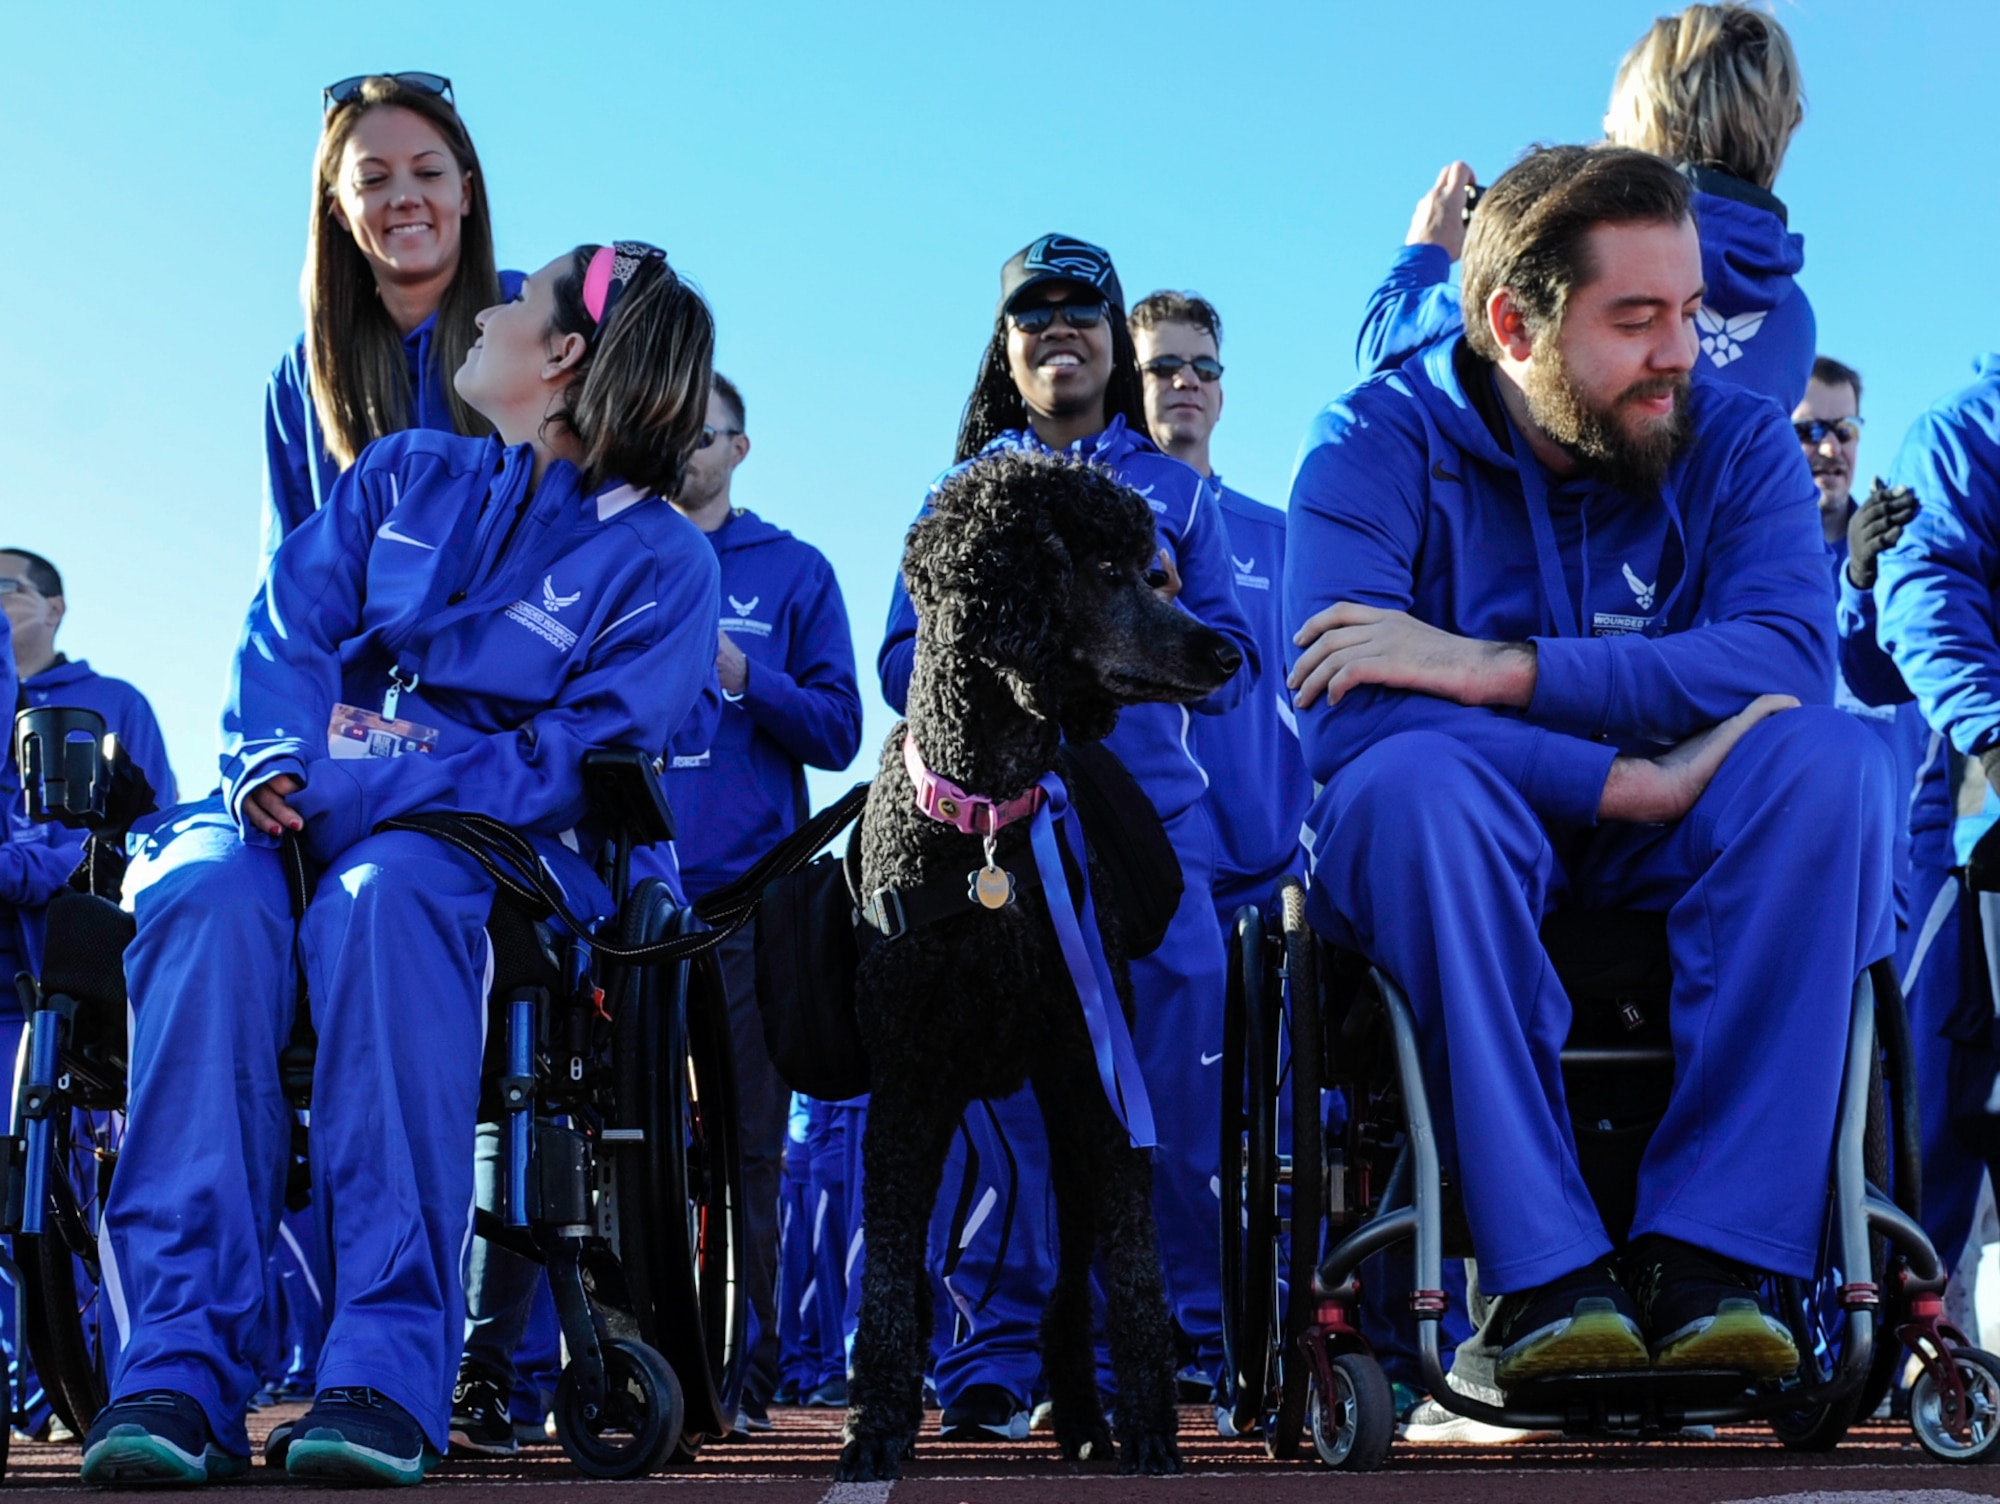 Competitors wait to be announced before the 2017 Air Force Wounded Warrior Trials opening ceremony on Nellis Air Force Base, Nev., Feb. 24, 2017. The Trials are an adaptive sports event designed to promote the mental and physical well-being of seriously ill and injured military members and veterans. (U.S. Air Force photo by Airman 1st Class Kevin Tanenbaum/Released)